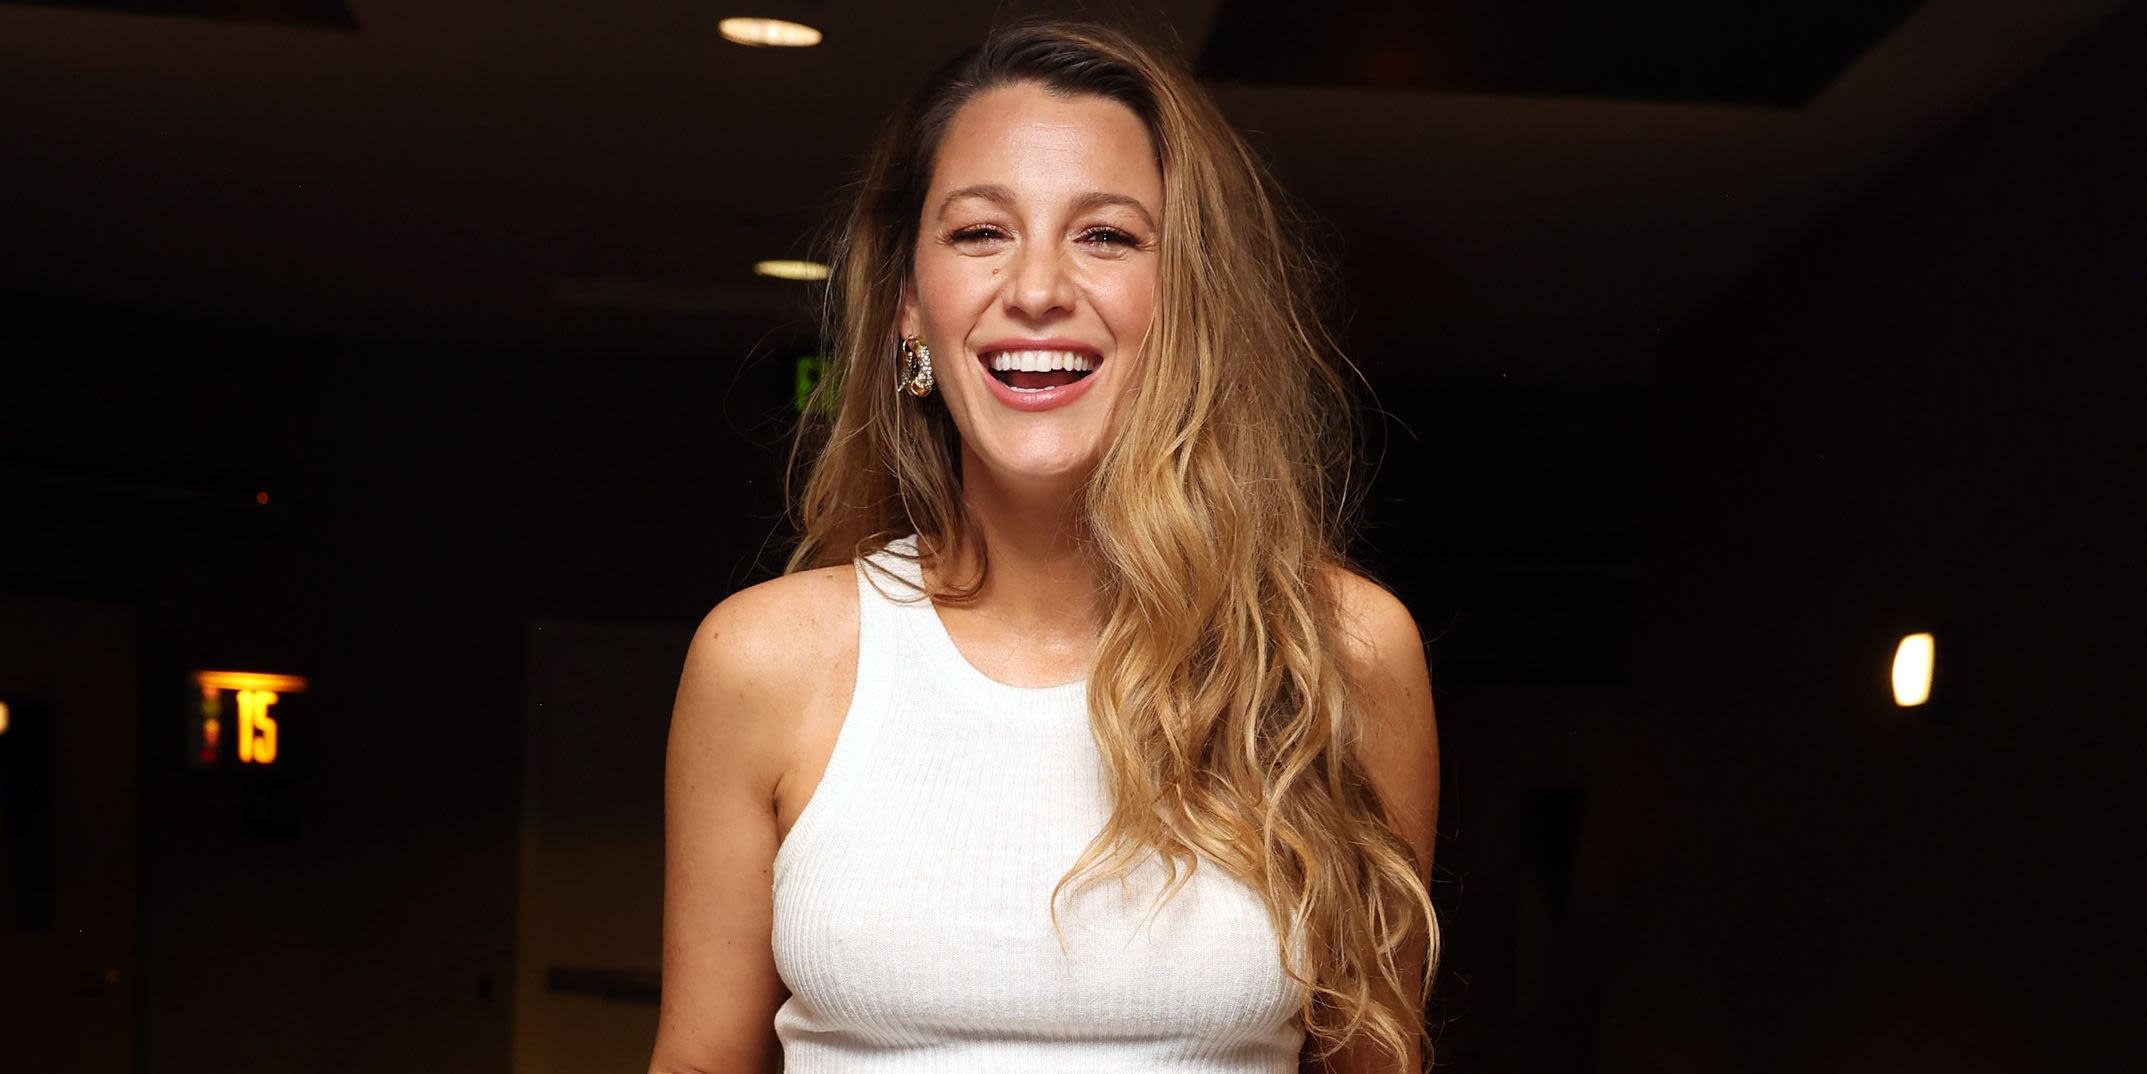 Blake Lively's hugeee tutu skirt and sequin bra top is serving sugarplum fairy realness